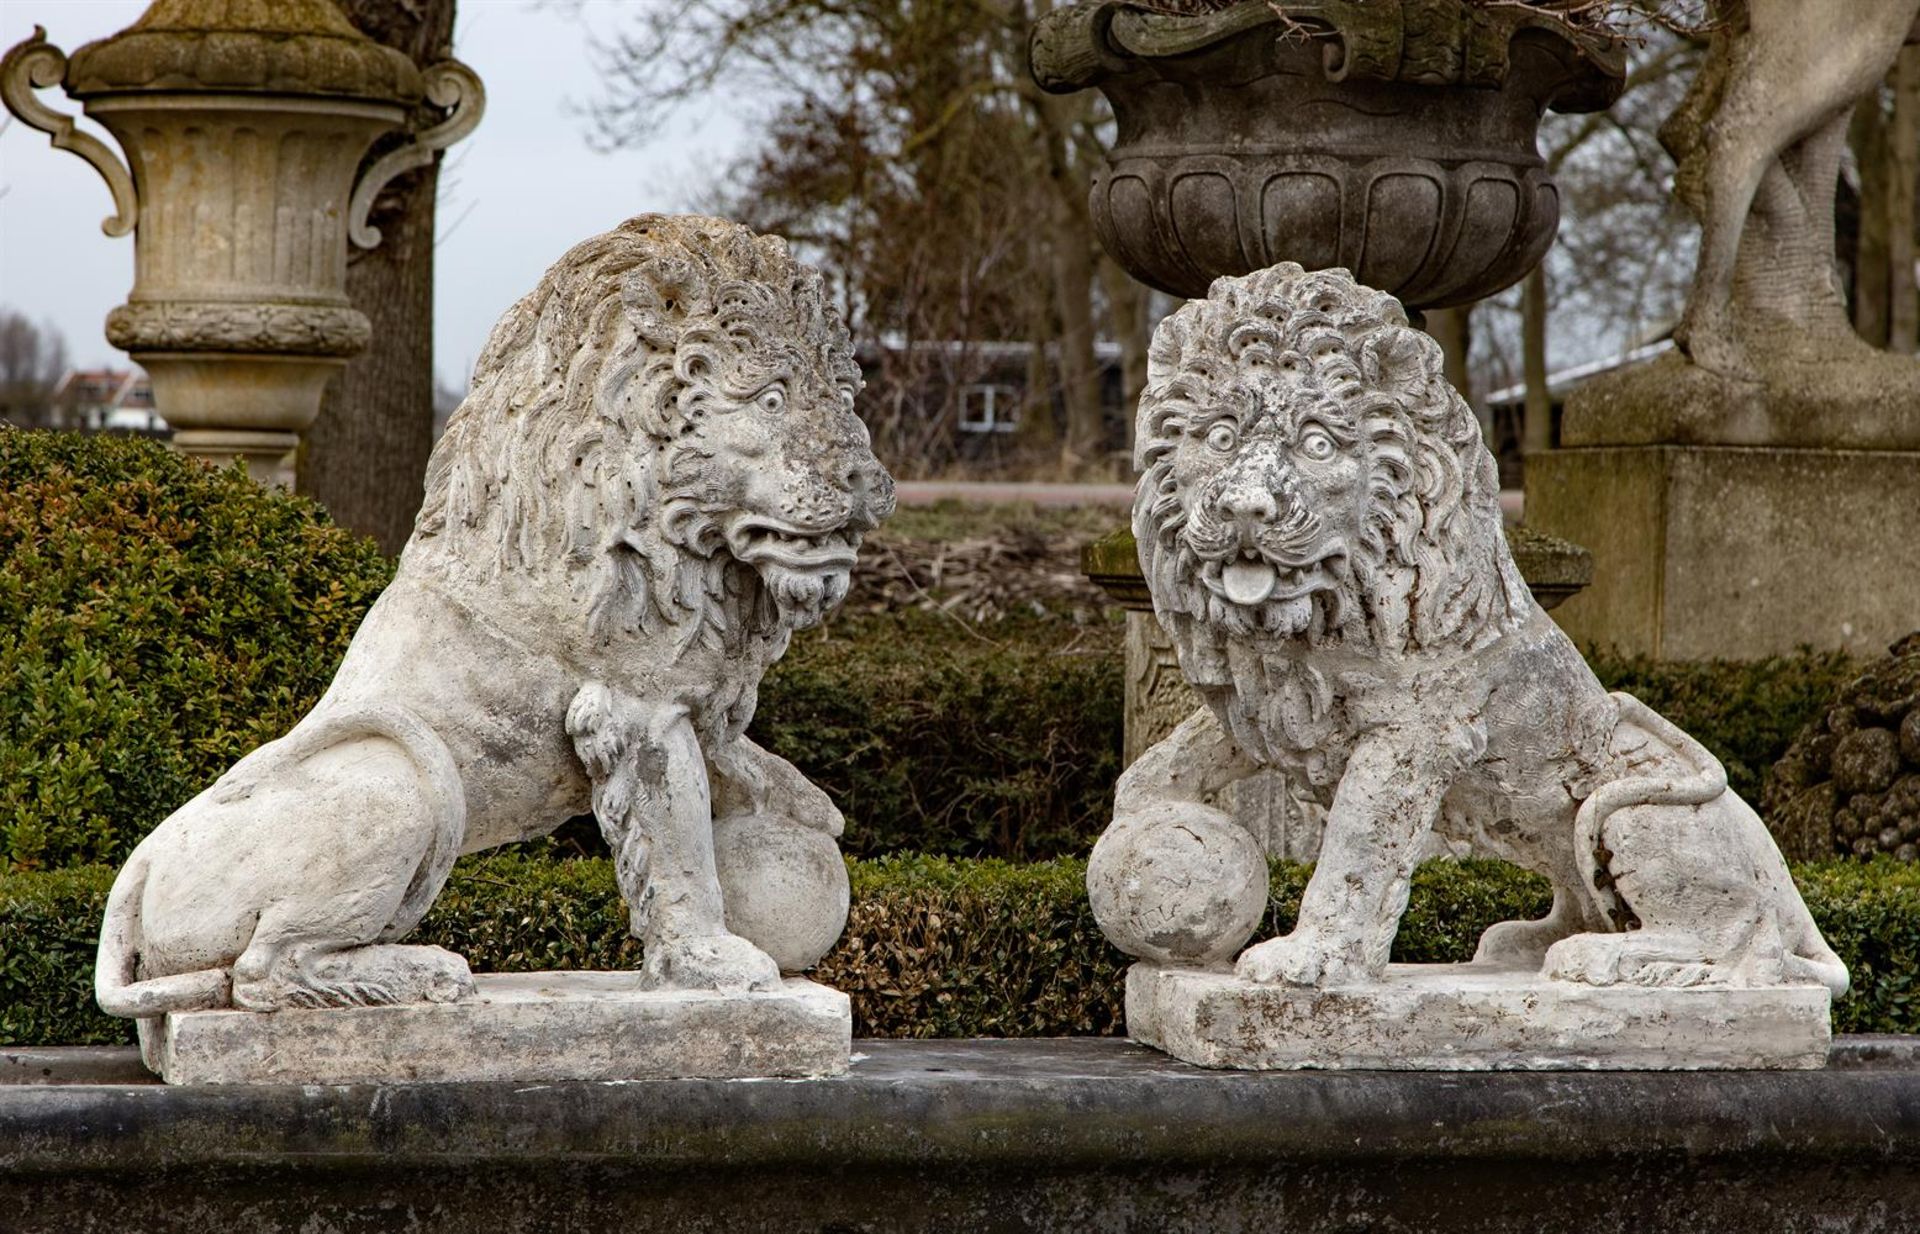 ‡ A PAIR OF COMPOSITION STONE MODELS OF LIONS IN THE 17TH CENTURY STYLE